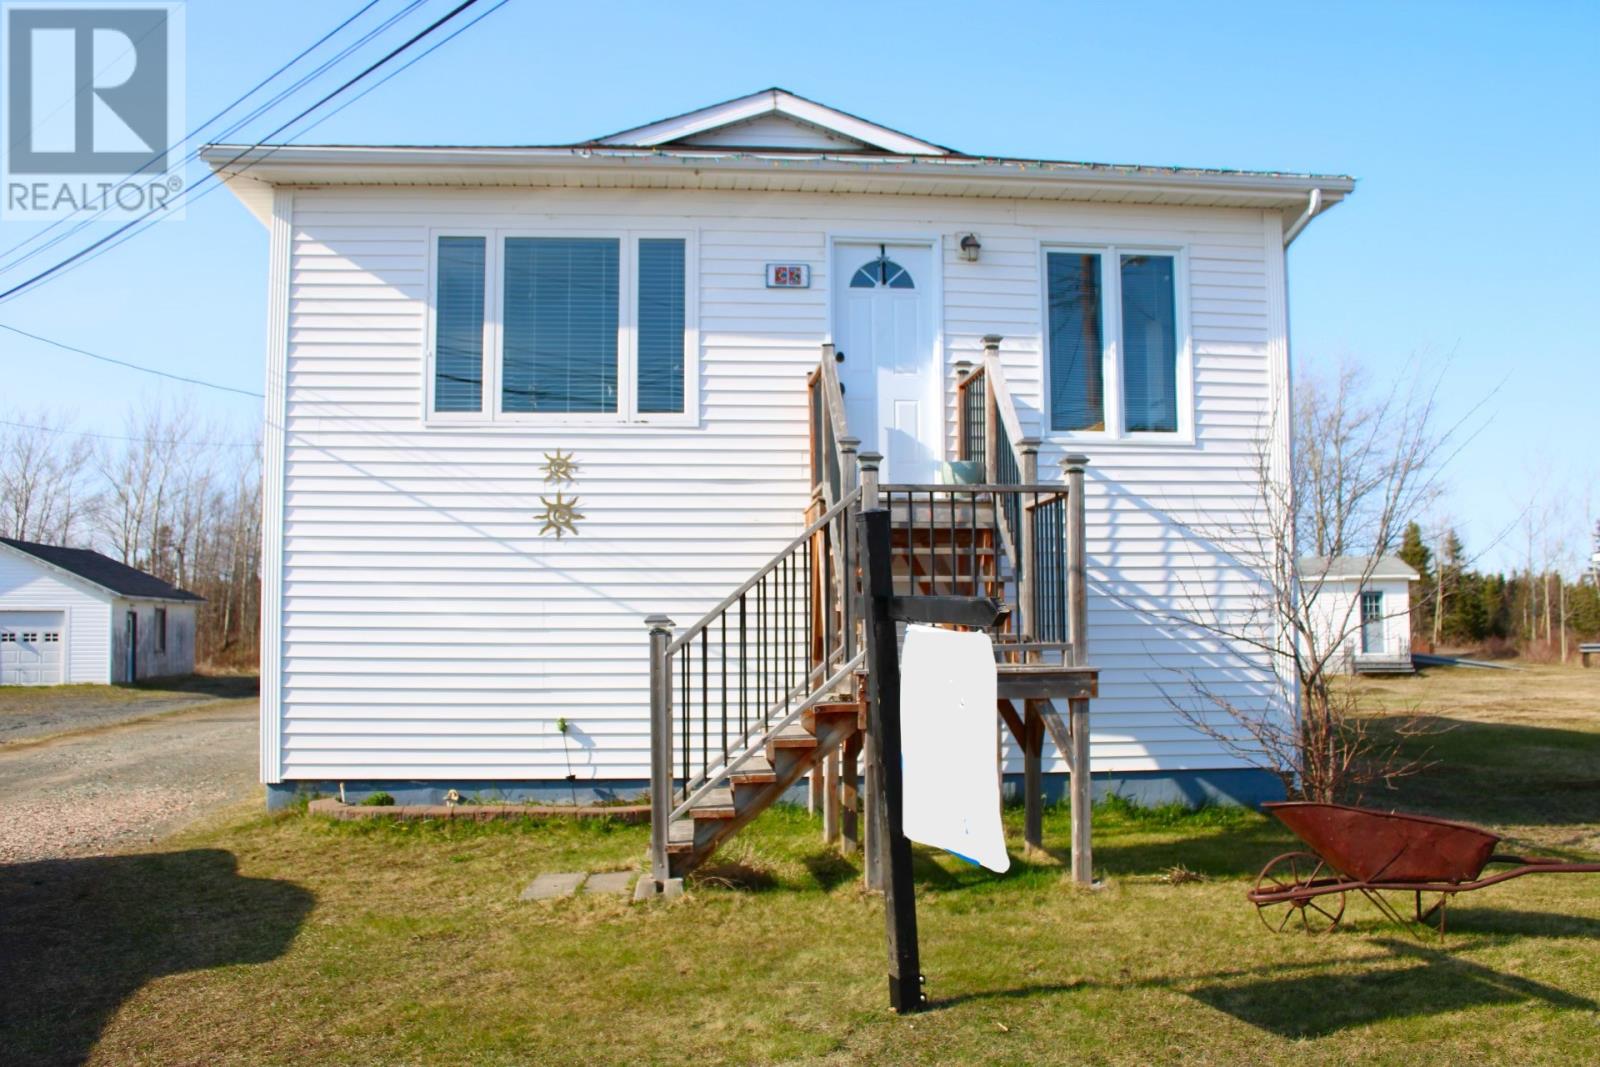 33 Maple Street located in Badger, Newfoundland and Labrador